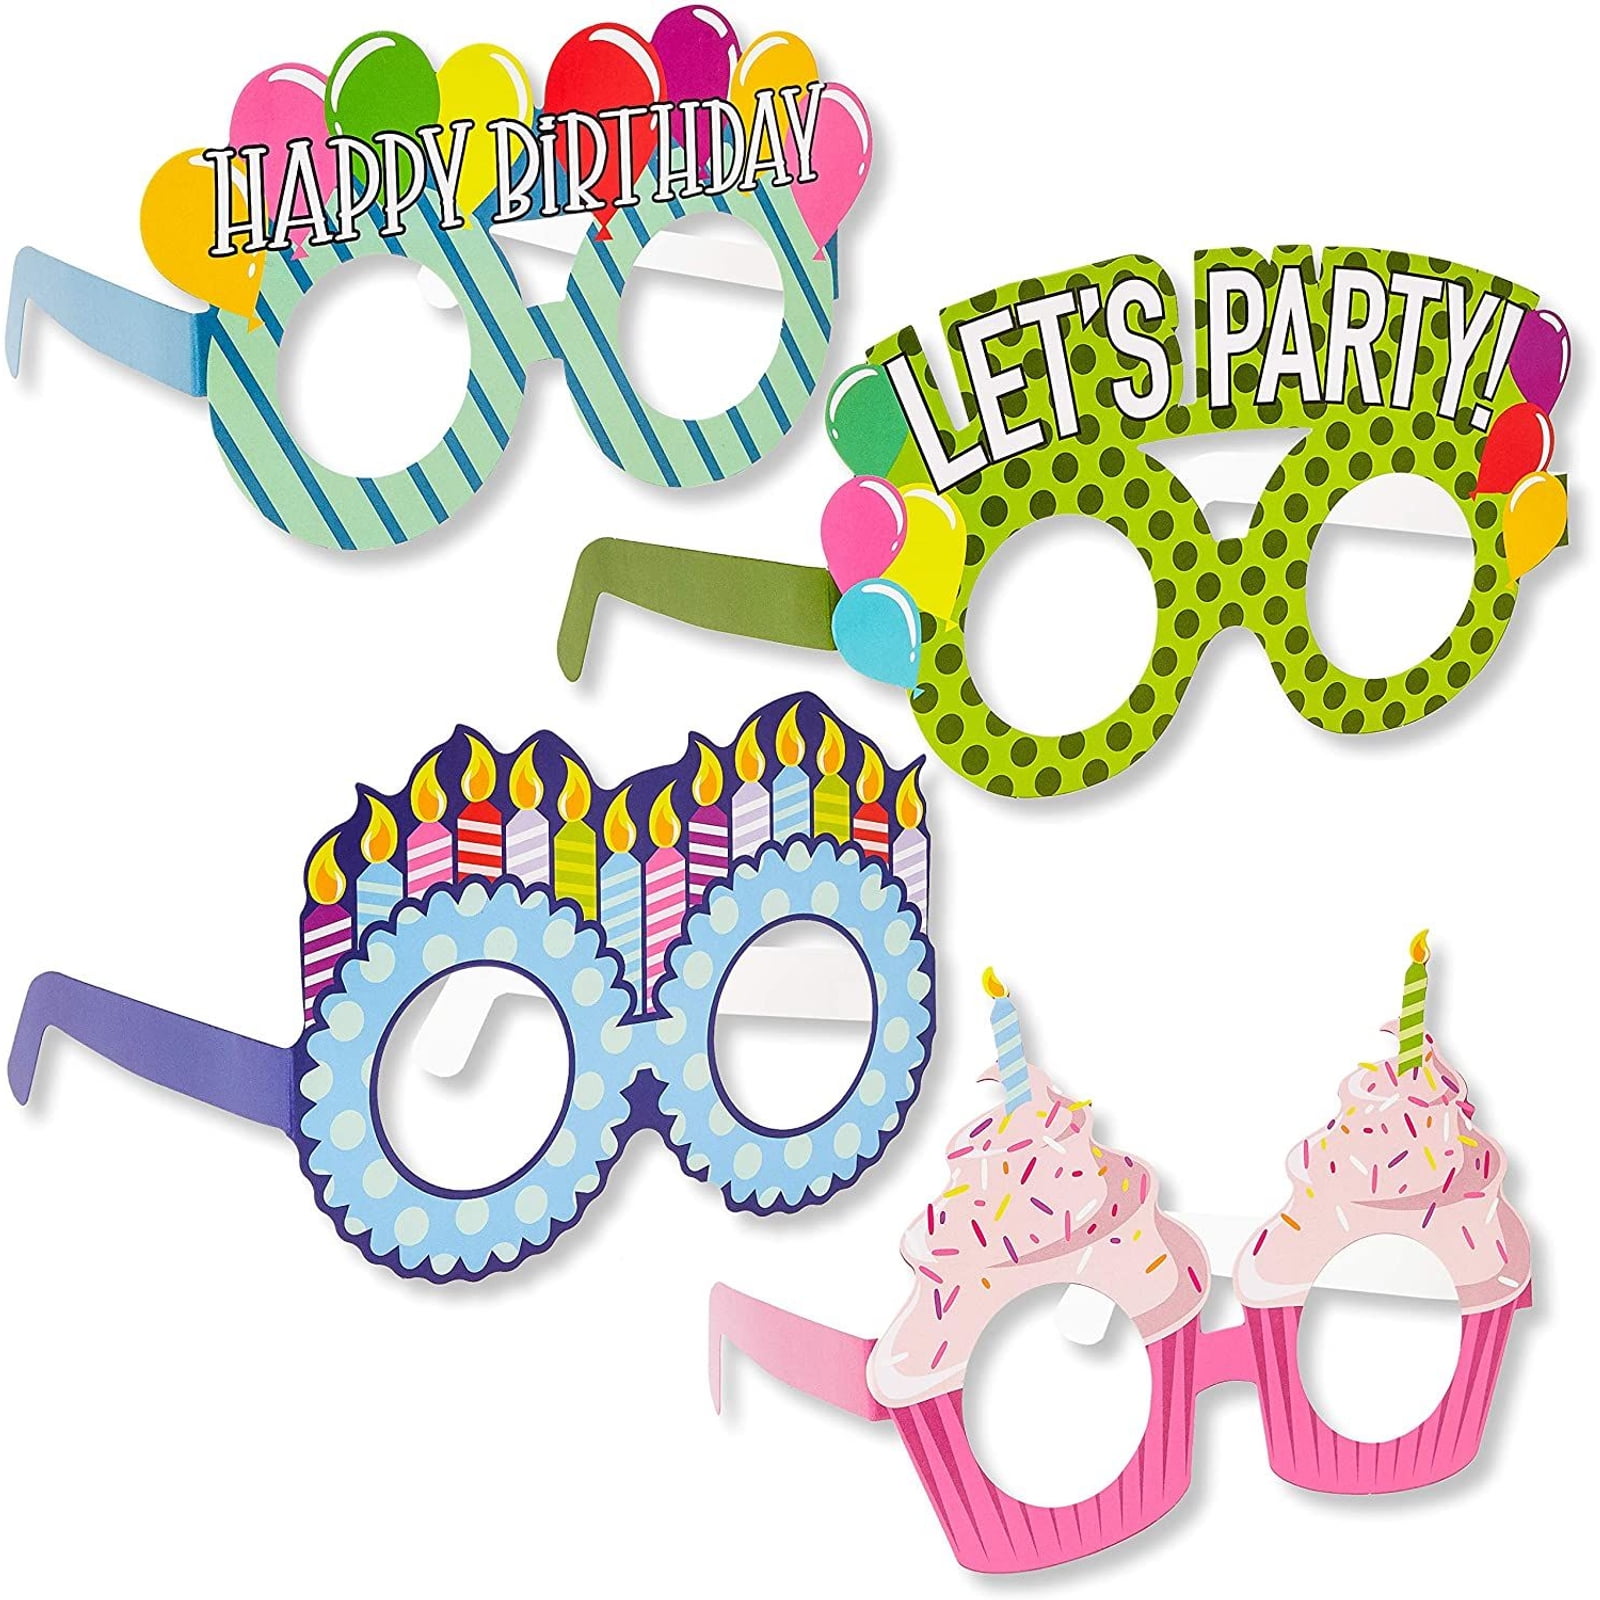 Toyvian Party Eyeglasses Happy Birthday Glasses 10 Pack Kids Novelty Eyeglasses Frames Birthday Party Supplies Photo Booth Prop Holiday Party Favor Gifts 